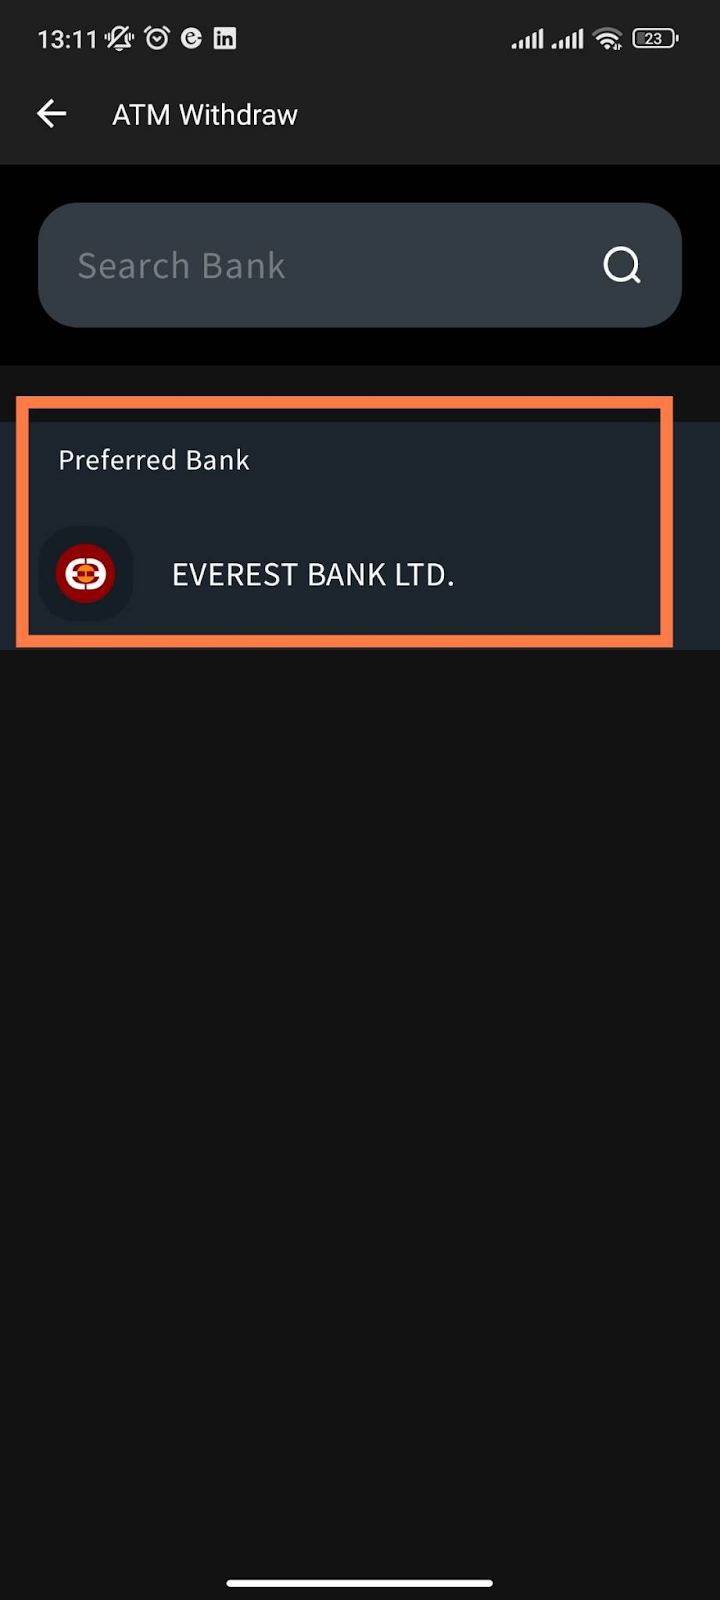 eSewa Enables Cash Withdrawals from Everest Bank ATMs